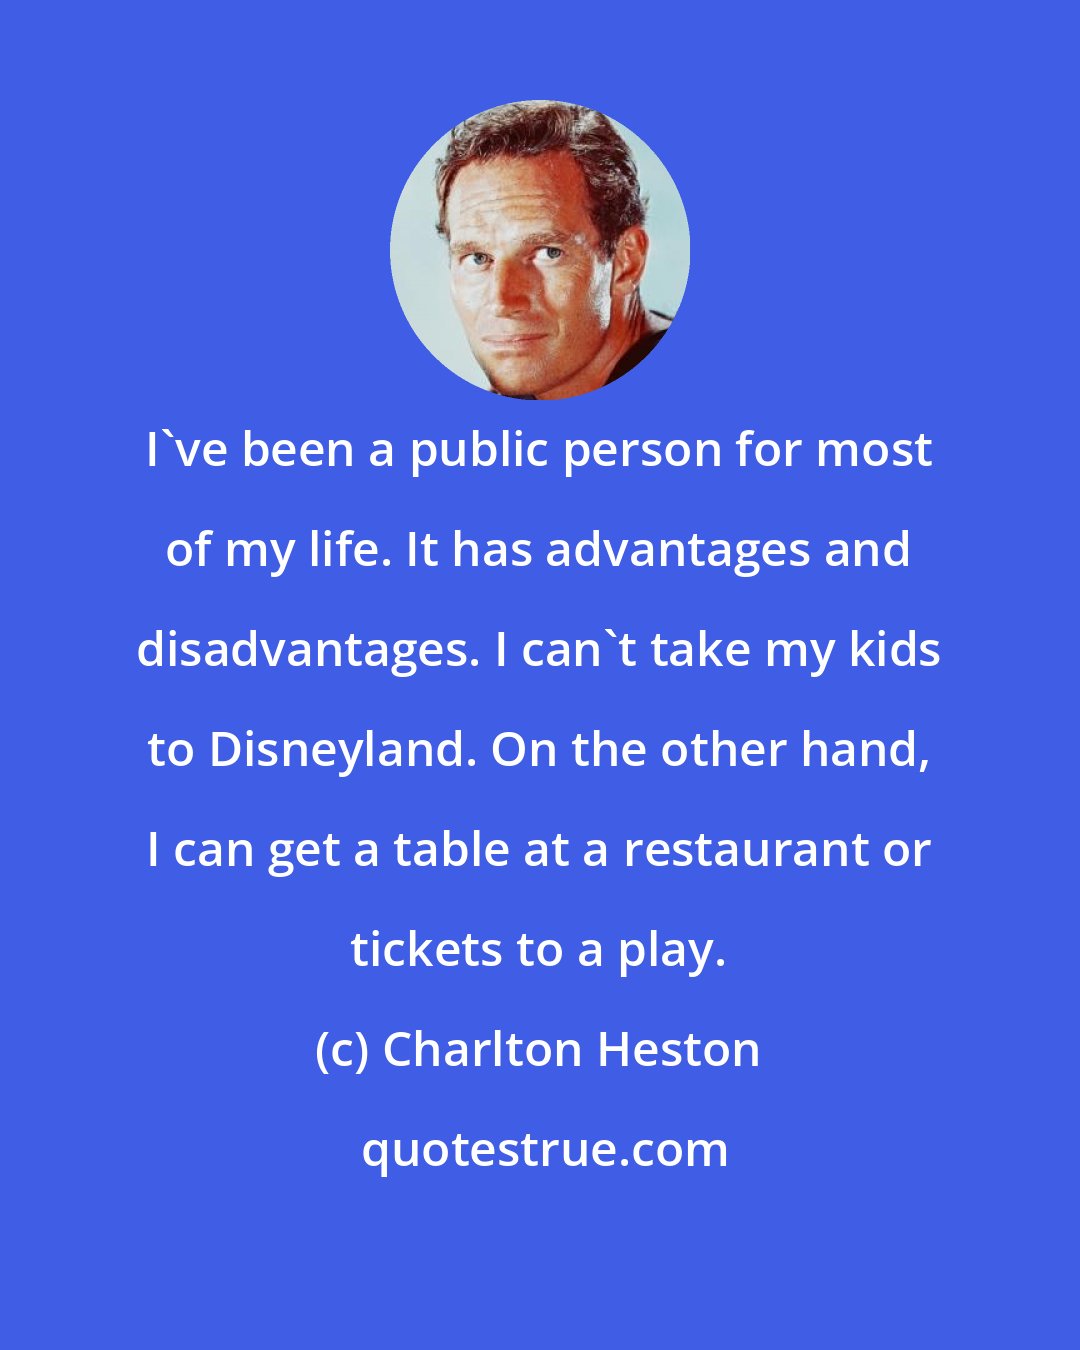 Charlton Heston: I've been a public person for most of my life. It has advantages and disadvantages. I can't take my kids to Disneyland. On the other hand, I can get a table at a restaurant or tickets to a play.